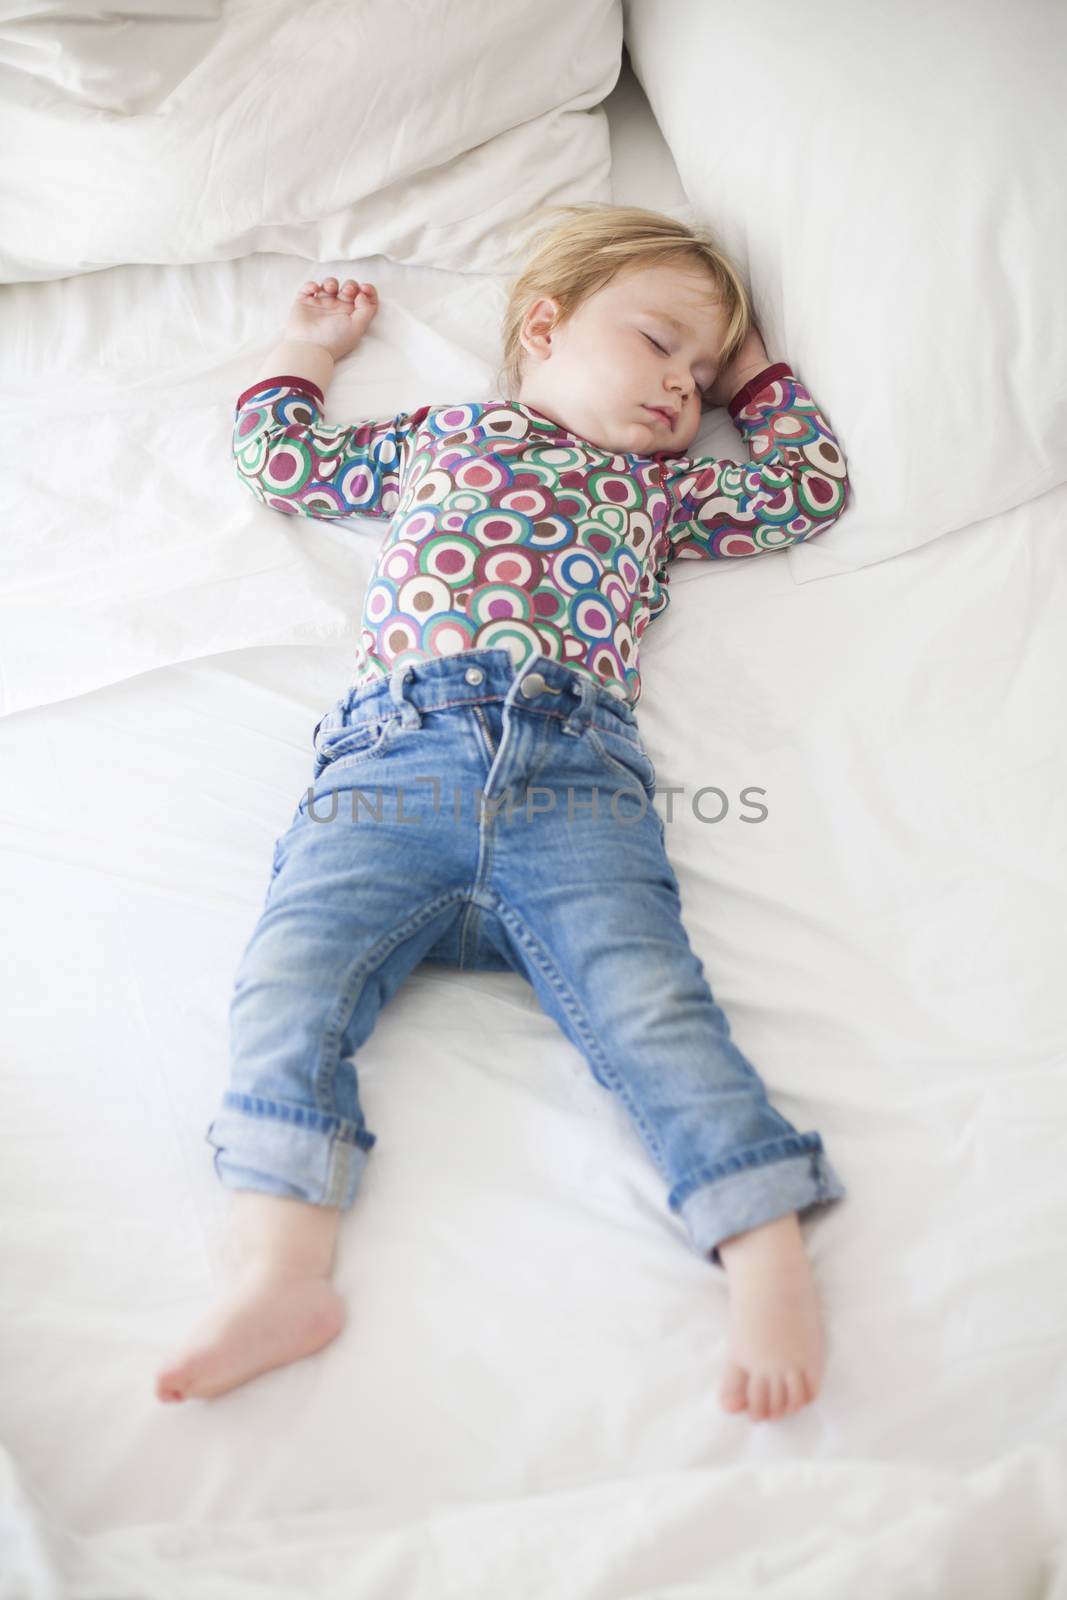 jeans baby sleeping on white bed by quintanilla